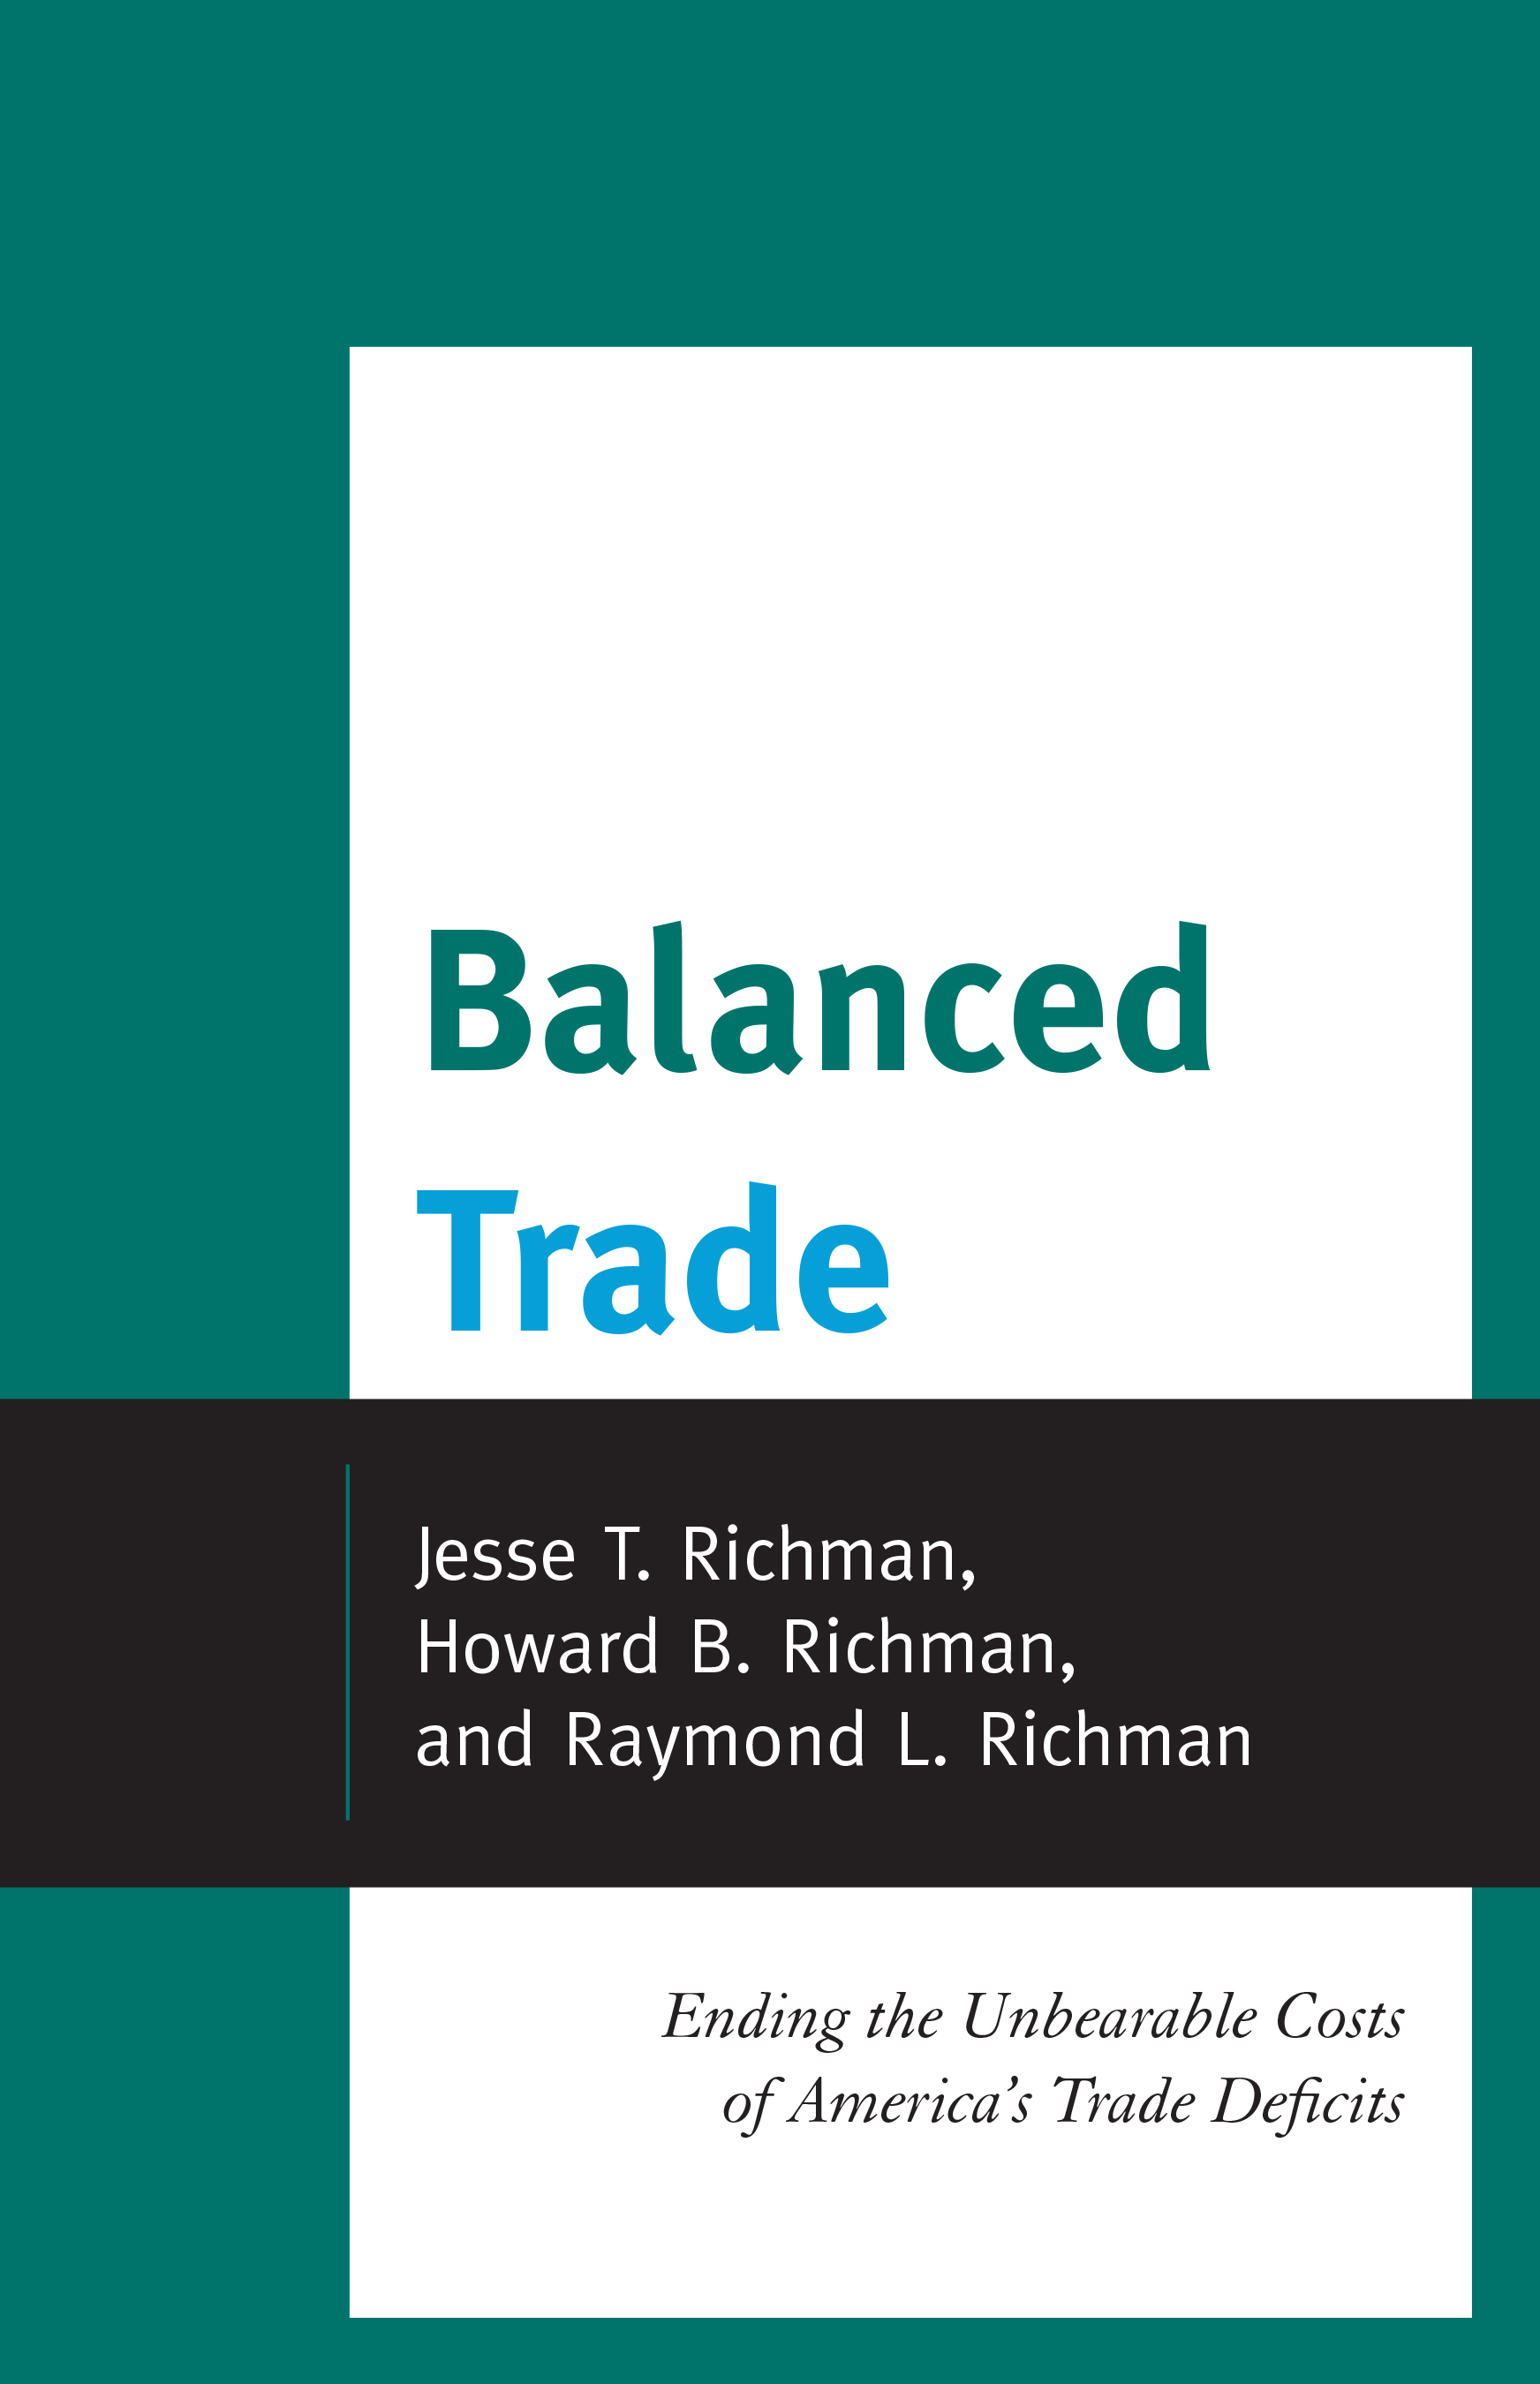 Balanced Trade: Ending the Unbearable Costs of America’s Trade Deficits